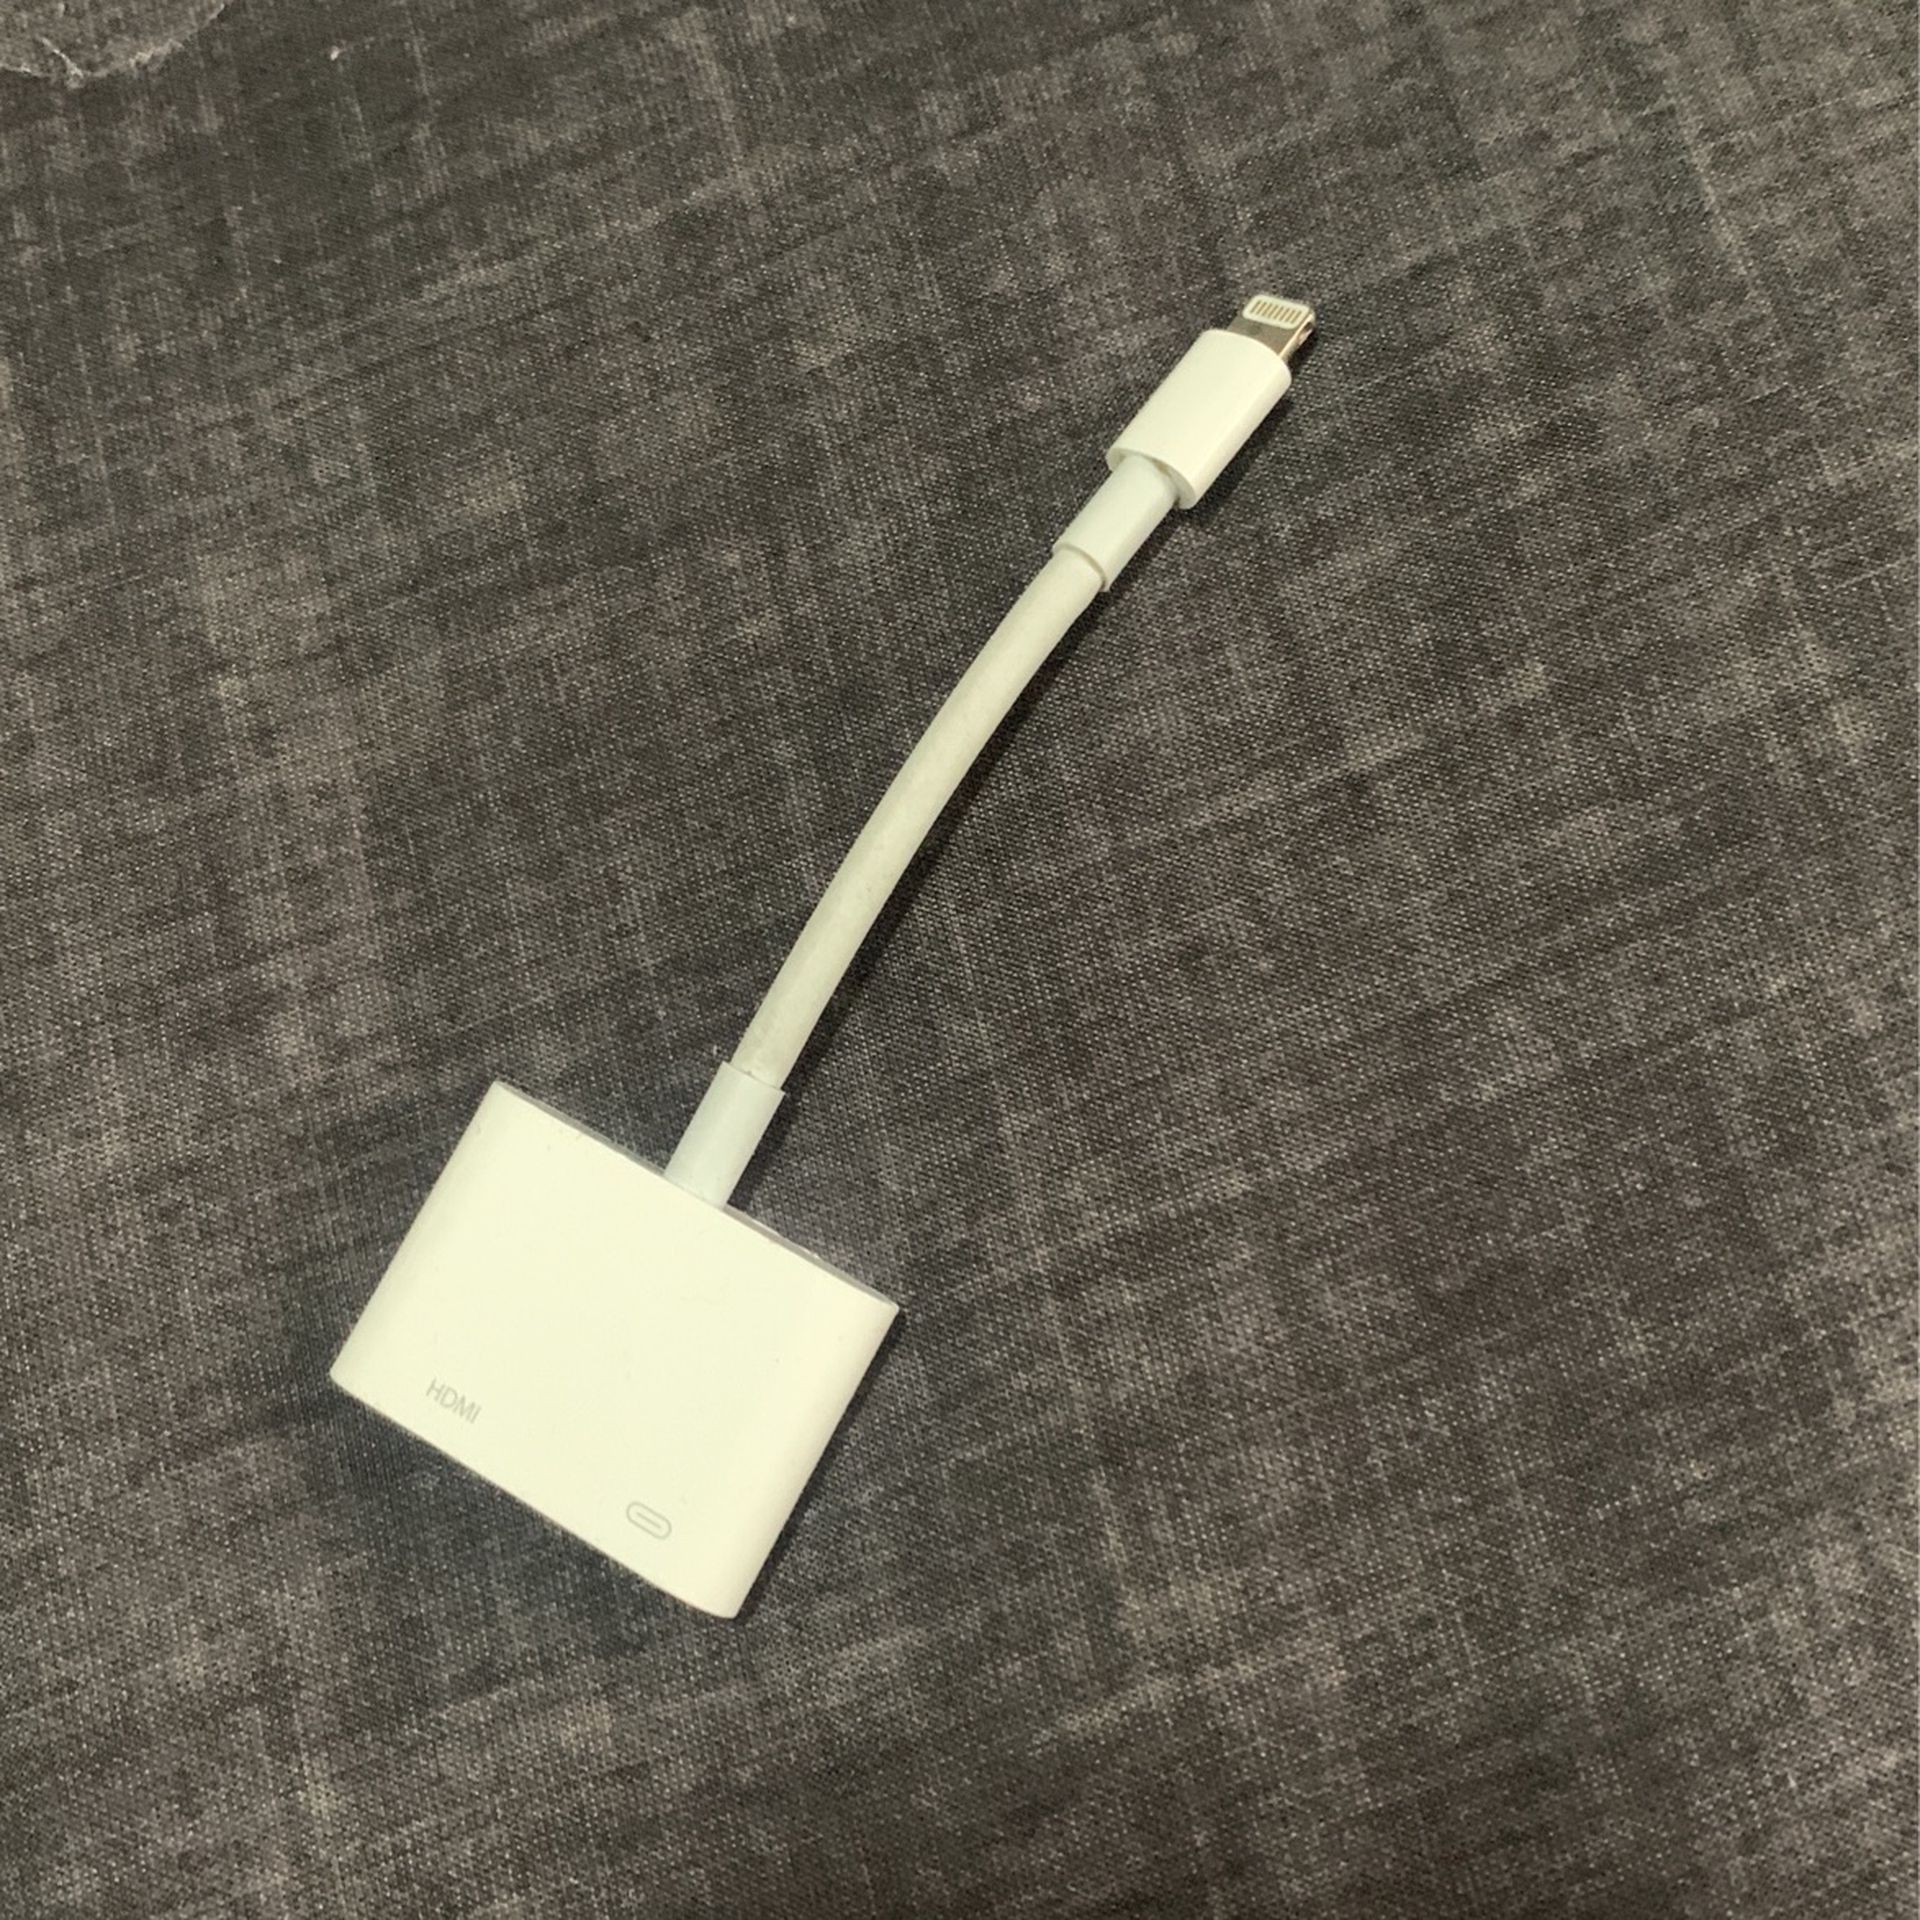 Apple HDMI to Tv Cable